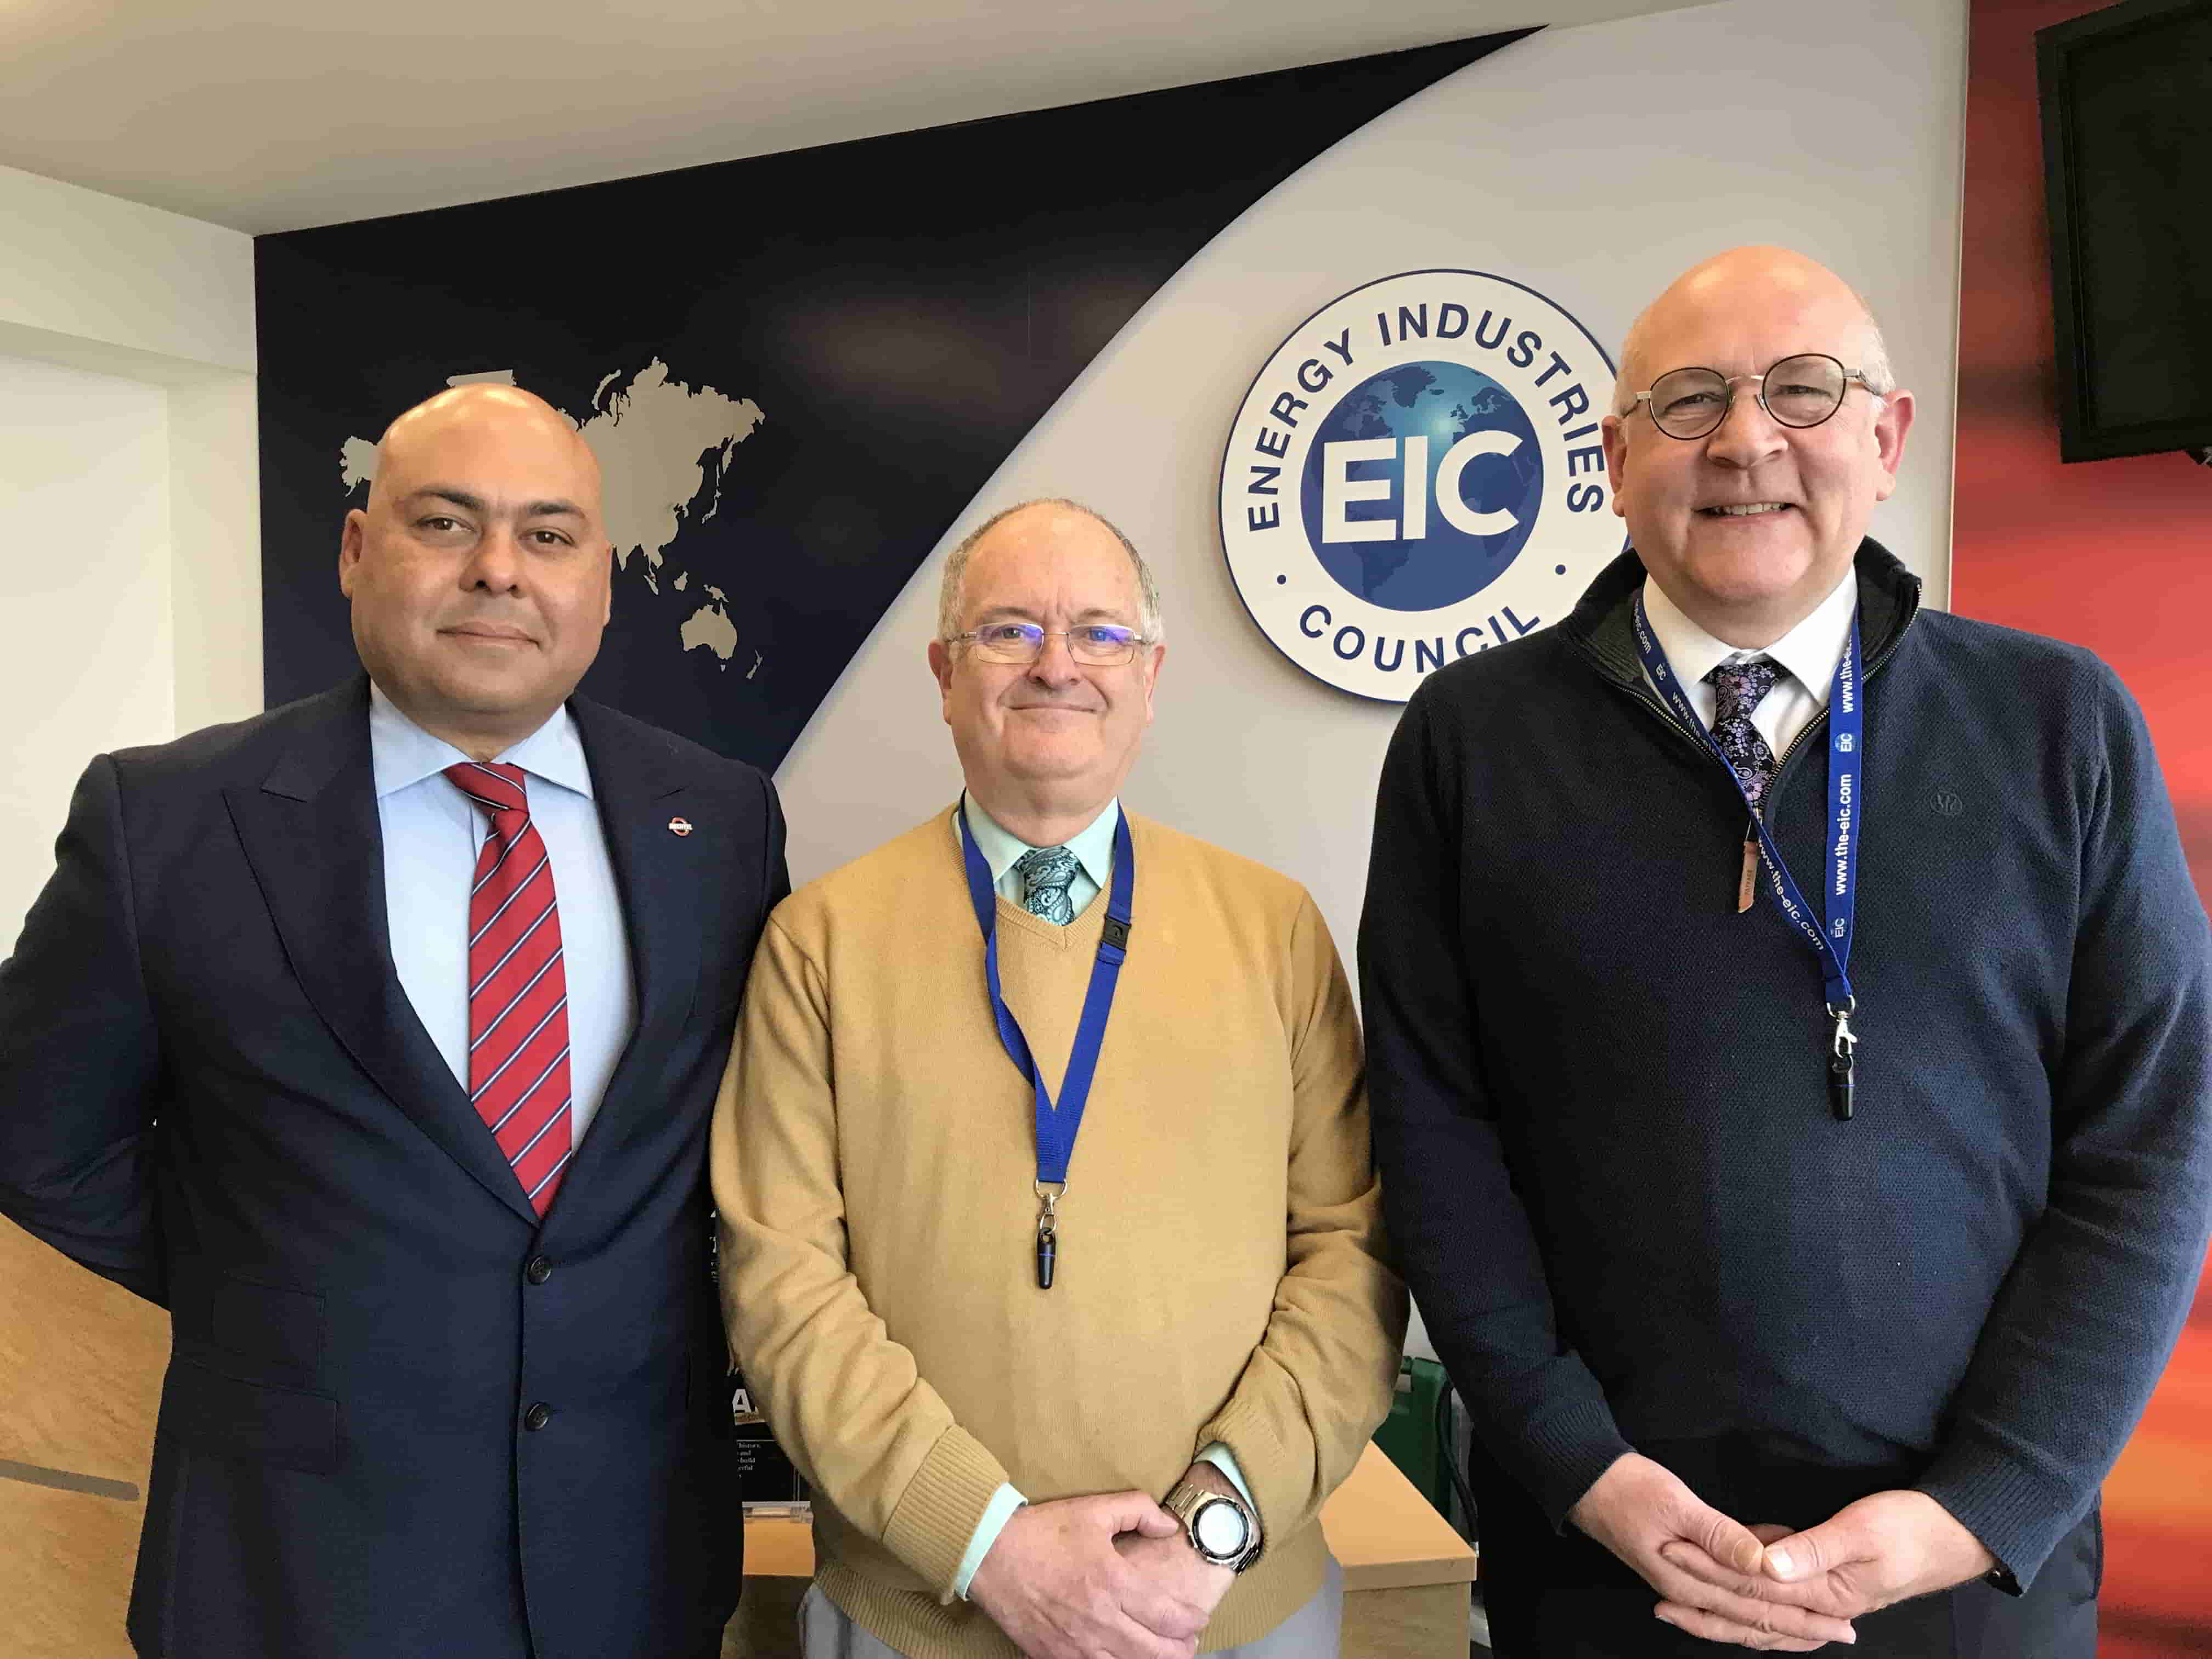 Left to Right of Picture-Andy Cuniah, new EIC chairman, Hugh Saville, outgoing chairman, Stuart Broadley, EIC CEO; Source: Energy Industries Council (EIC)